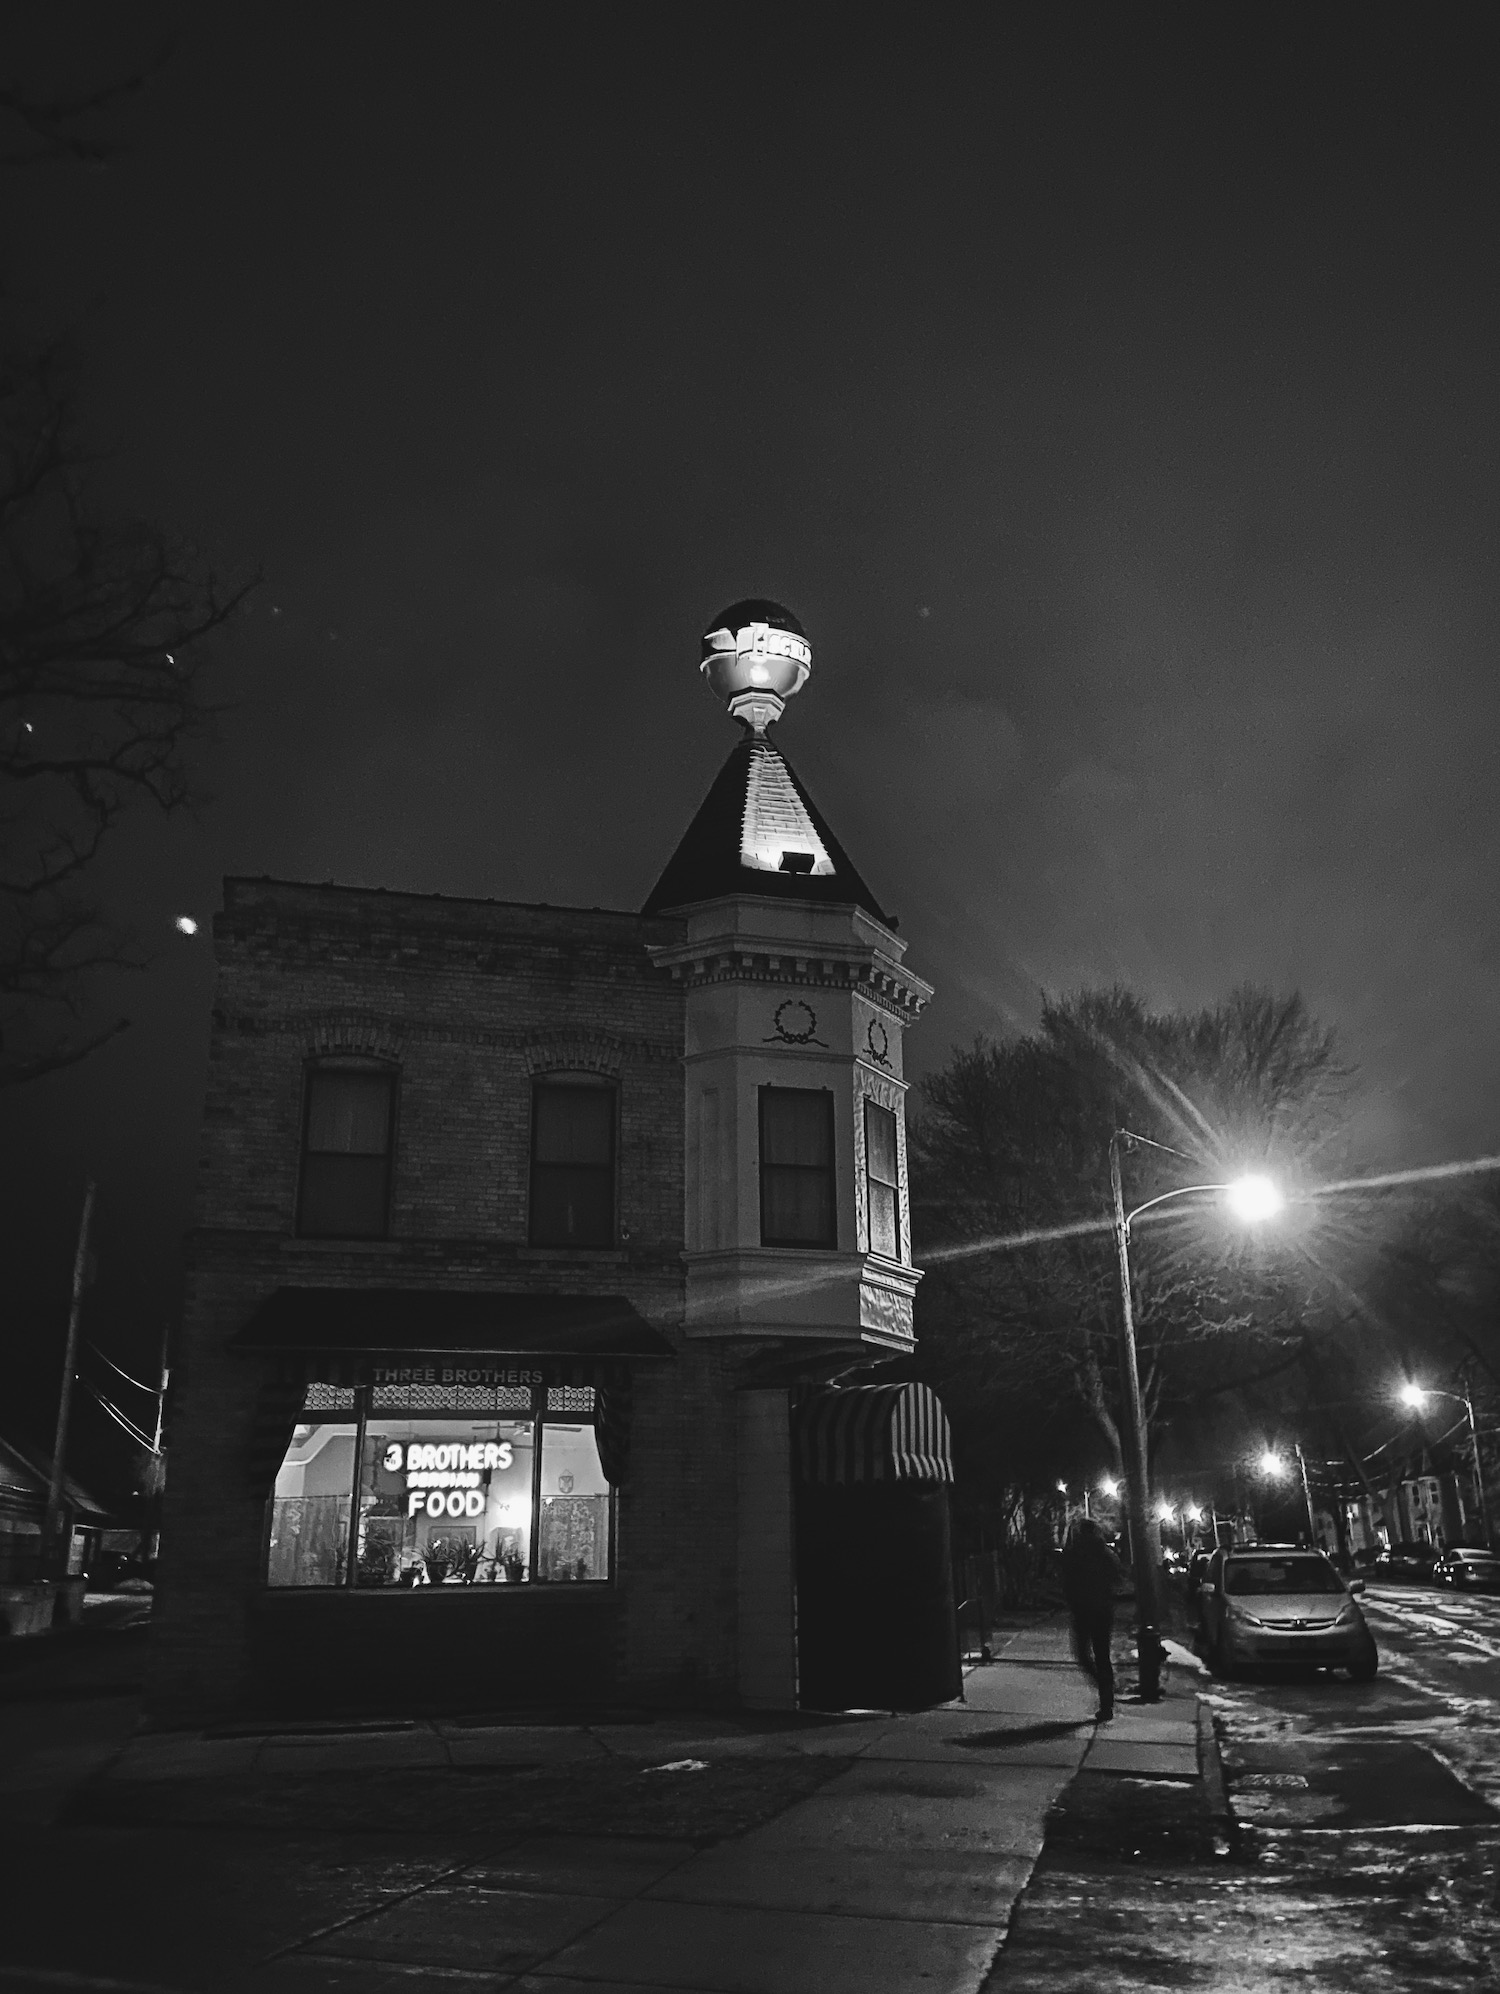 A black-and-white photo of a restaurant with a neon sign that reads 3 Brothers Serbian Food in its window, with an illuminated Schlitz Beer globe on its roof, on a quiet Milwaukee street.